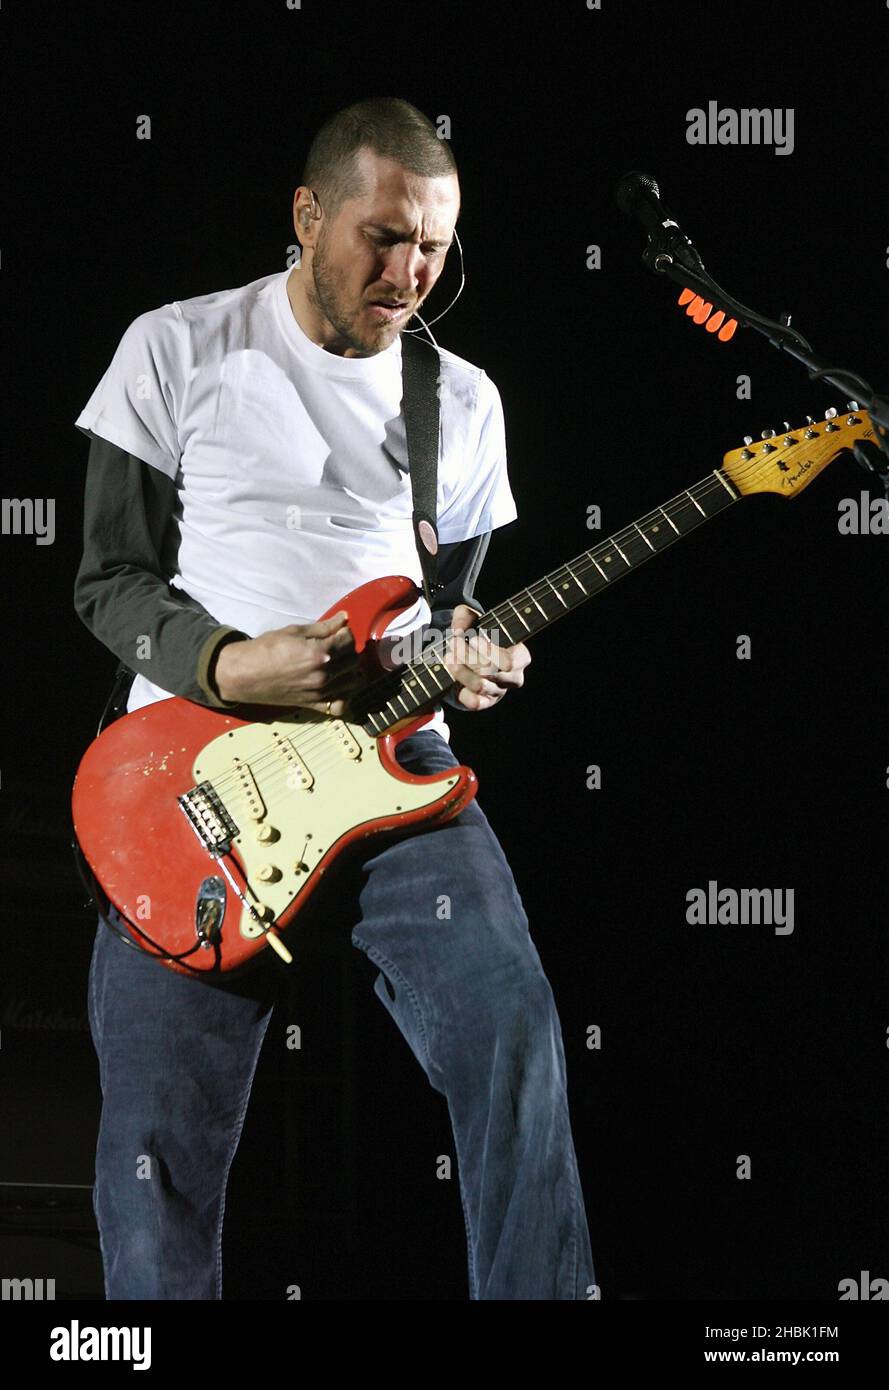 The Red Hot Chili Peppers lead guitarist, John Frusciante, performs at The Roundhouse on November 22, 2006 in London. Stock Photo